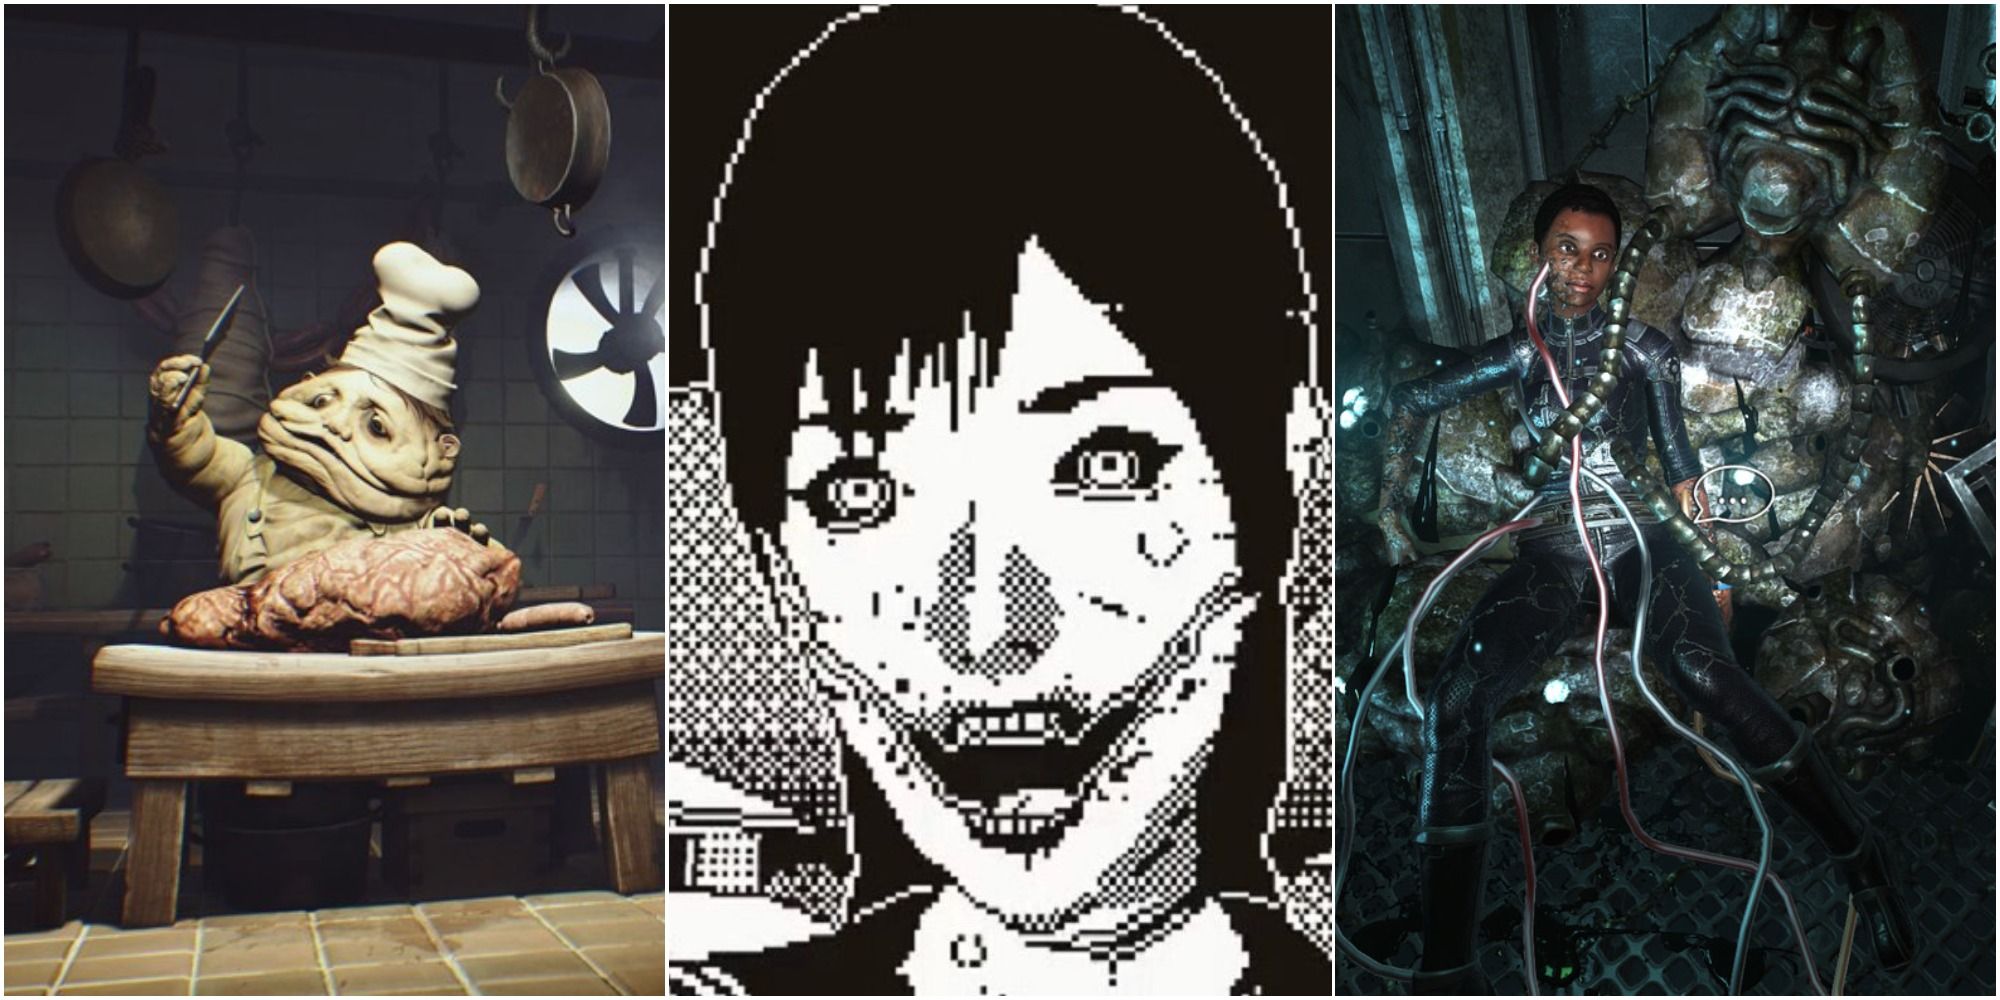 Horror Games That Don't Rely On Jump Scares Little Nightmares World of Horror and SOMA